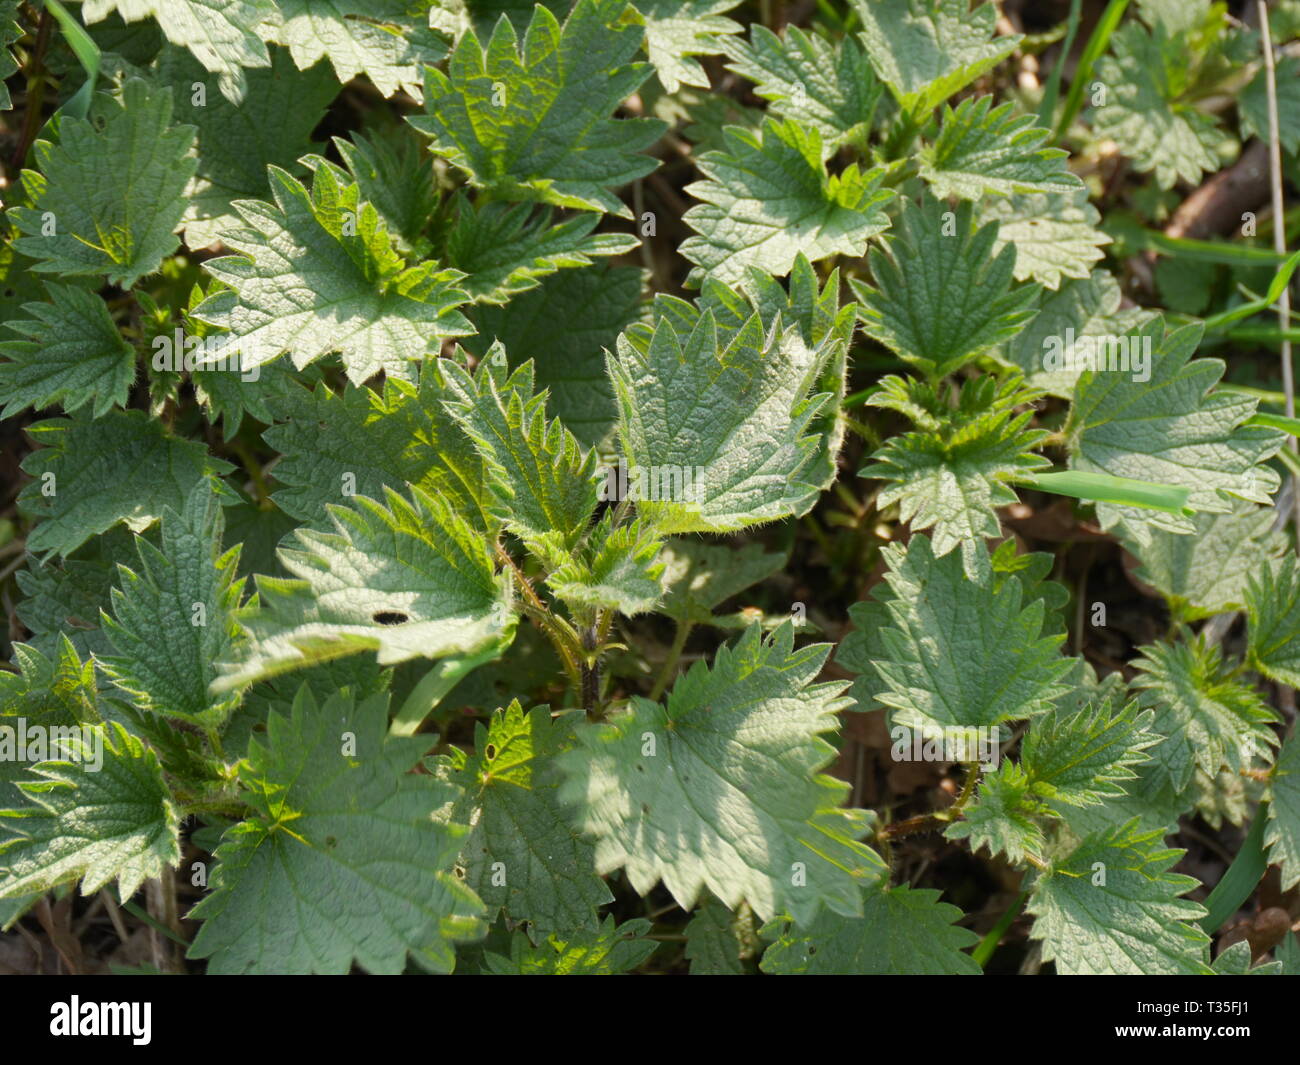 Stinging Nettle Leaves High Resolution Stock Photography and Images - Alamy